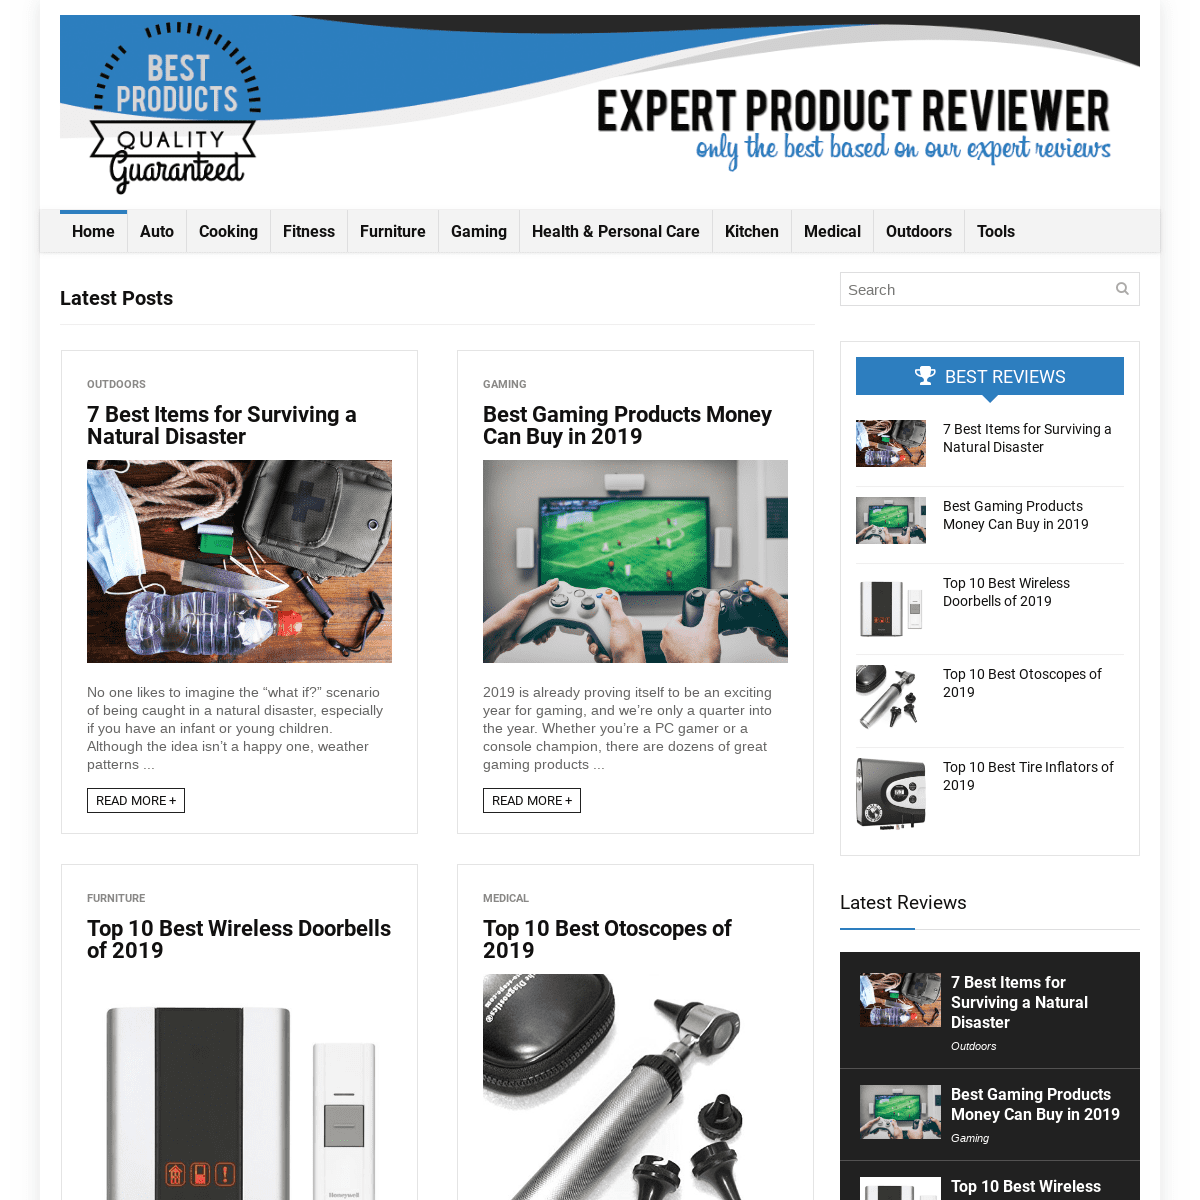 Expert Product Reviewer – We show you only the best based on our expert reviews